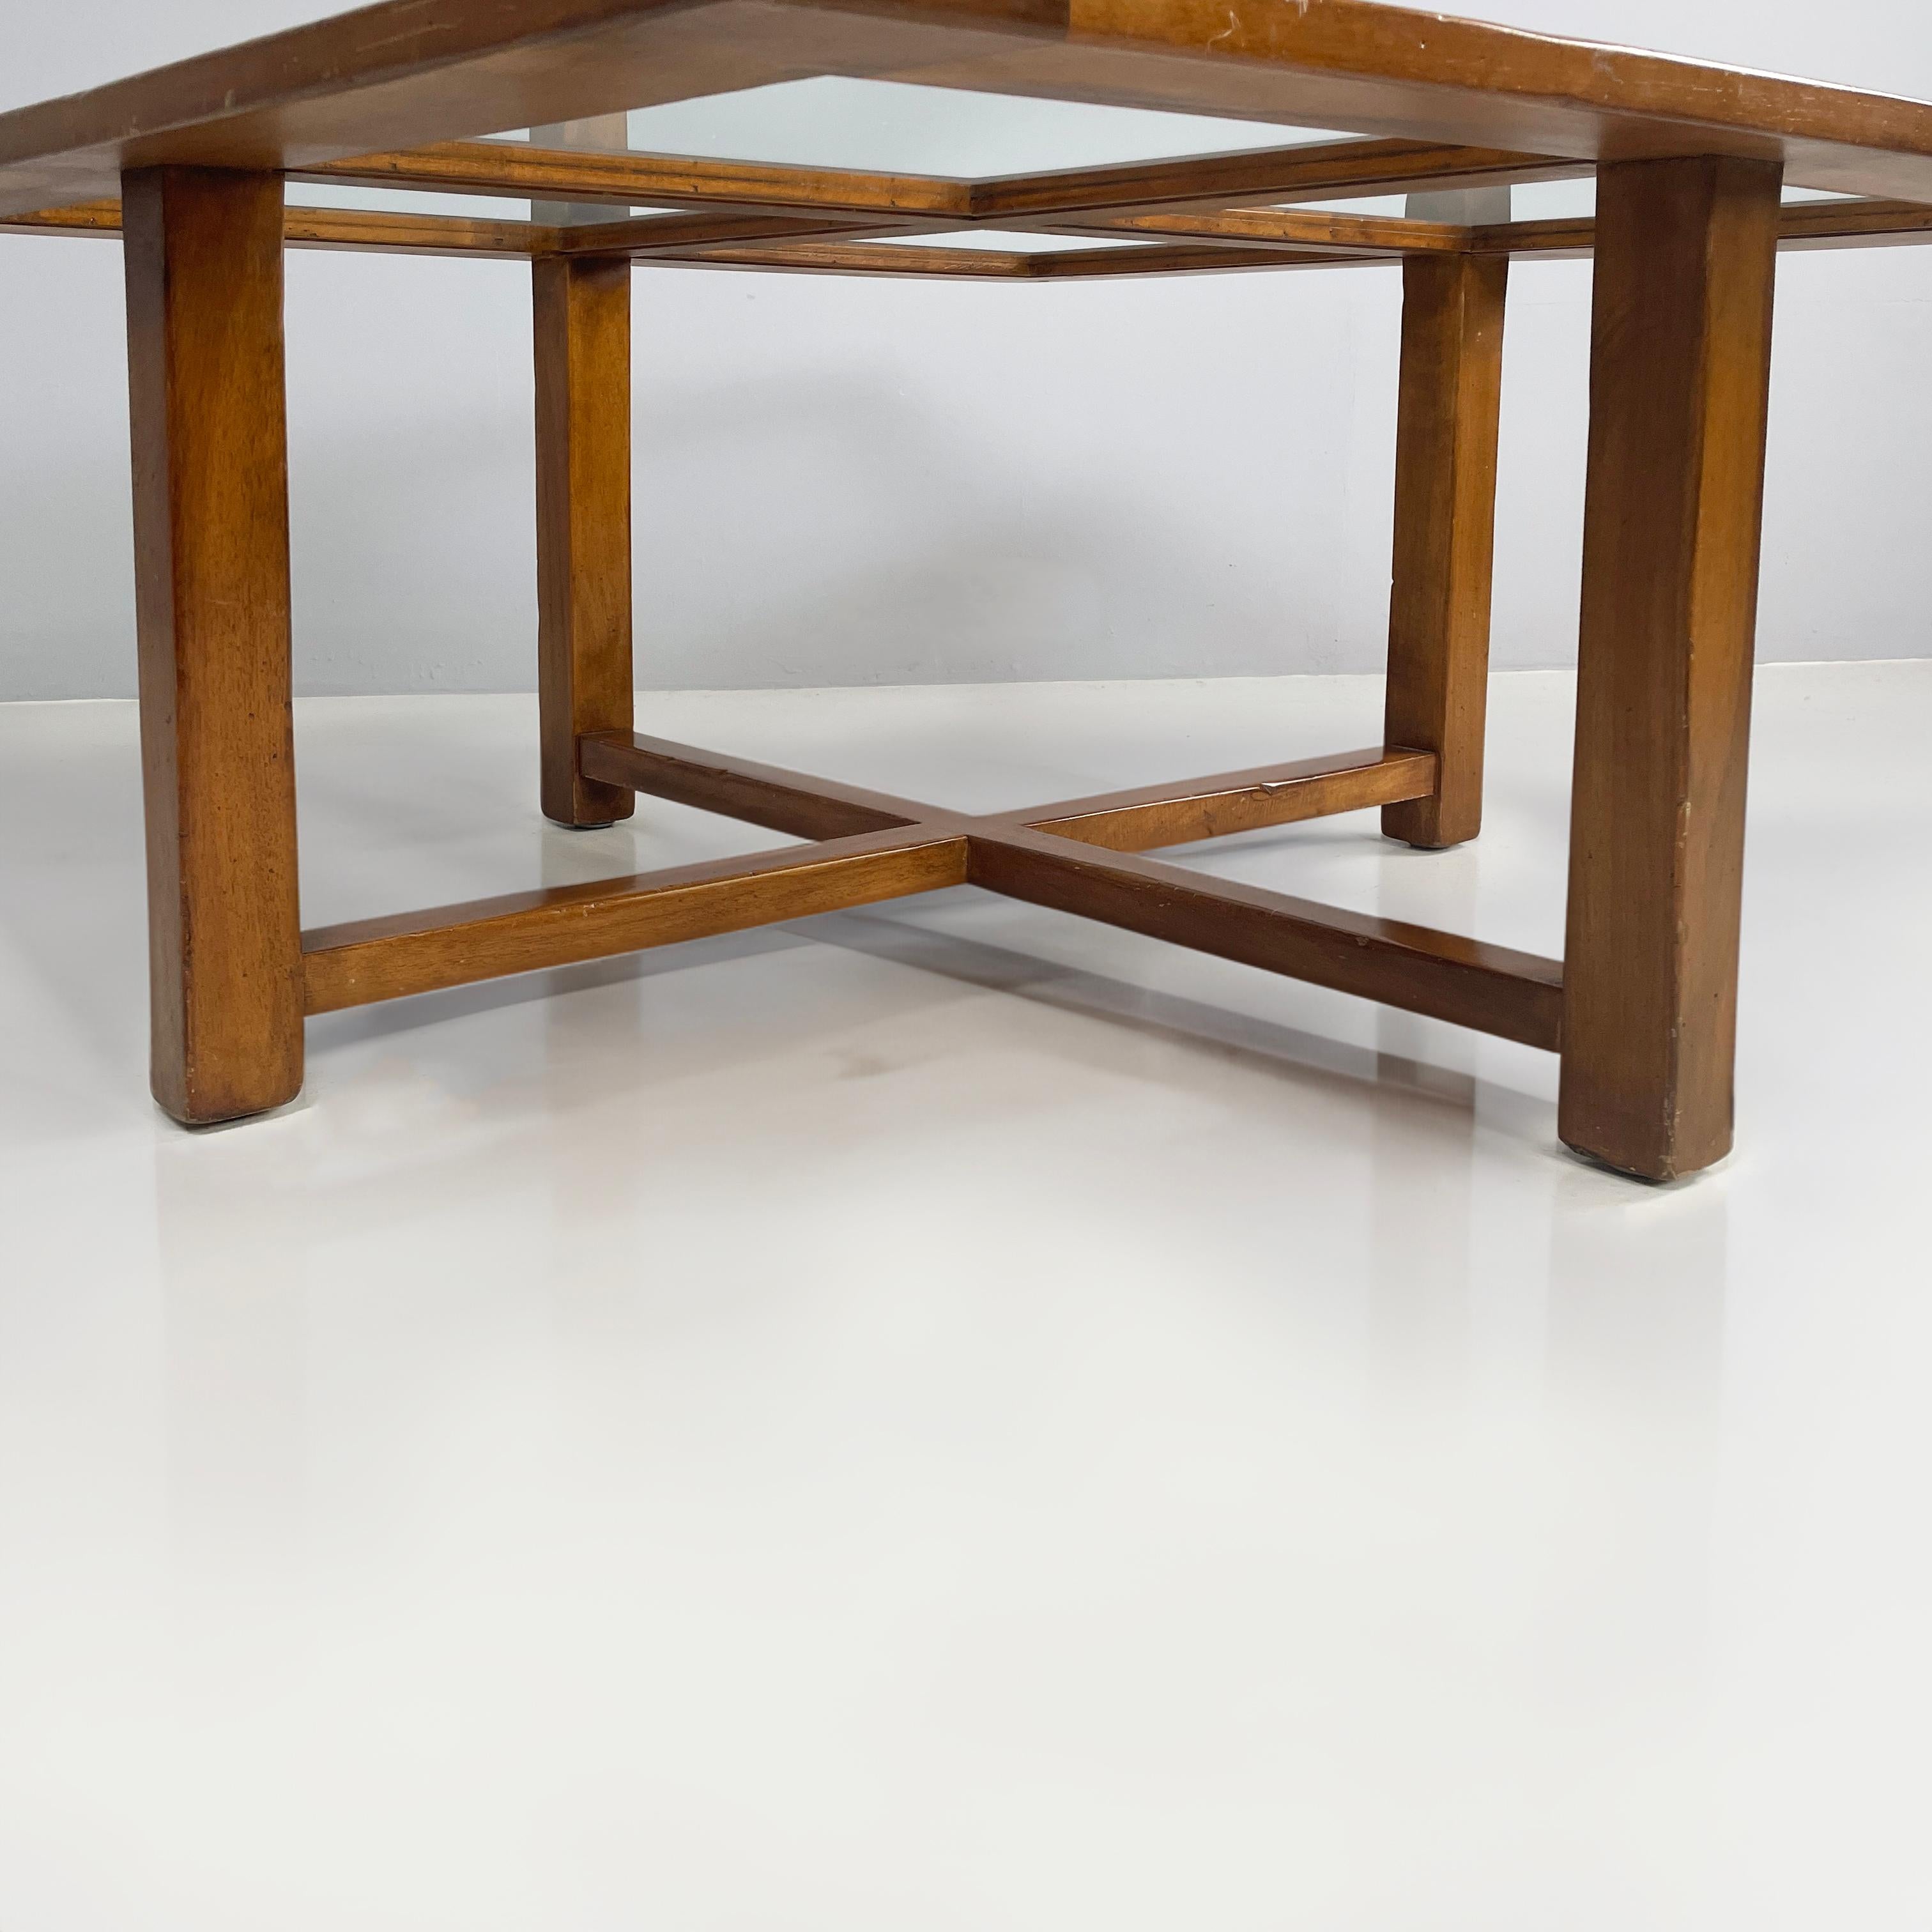 Italian modern Square coffee table in wood and glass, 1980s For Sale 7